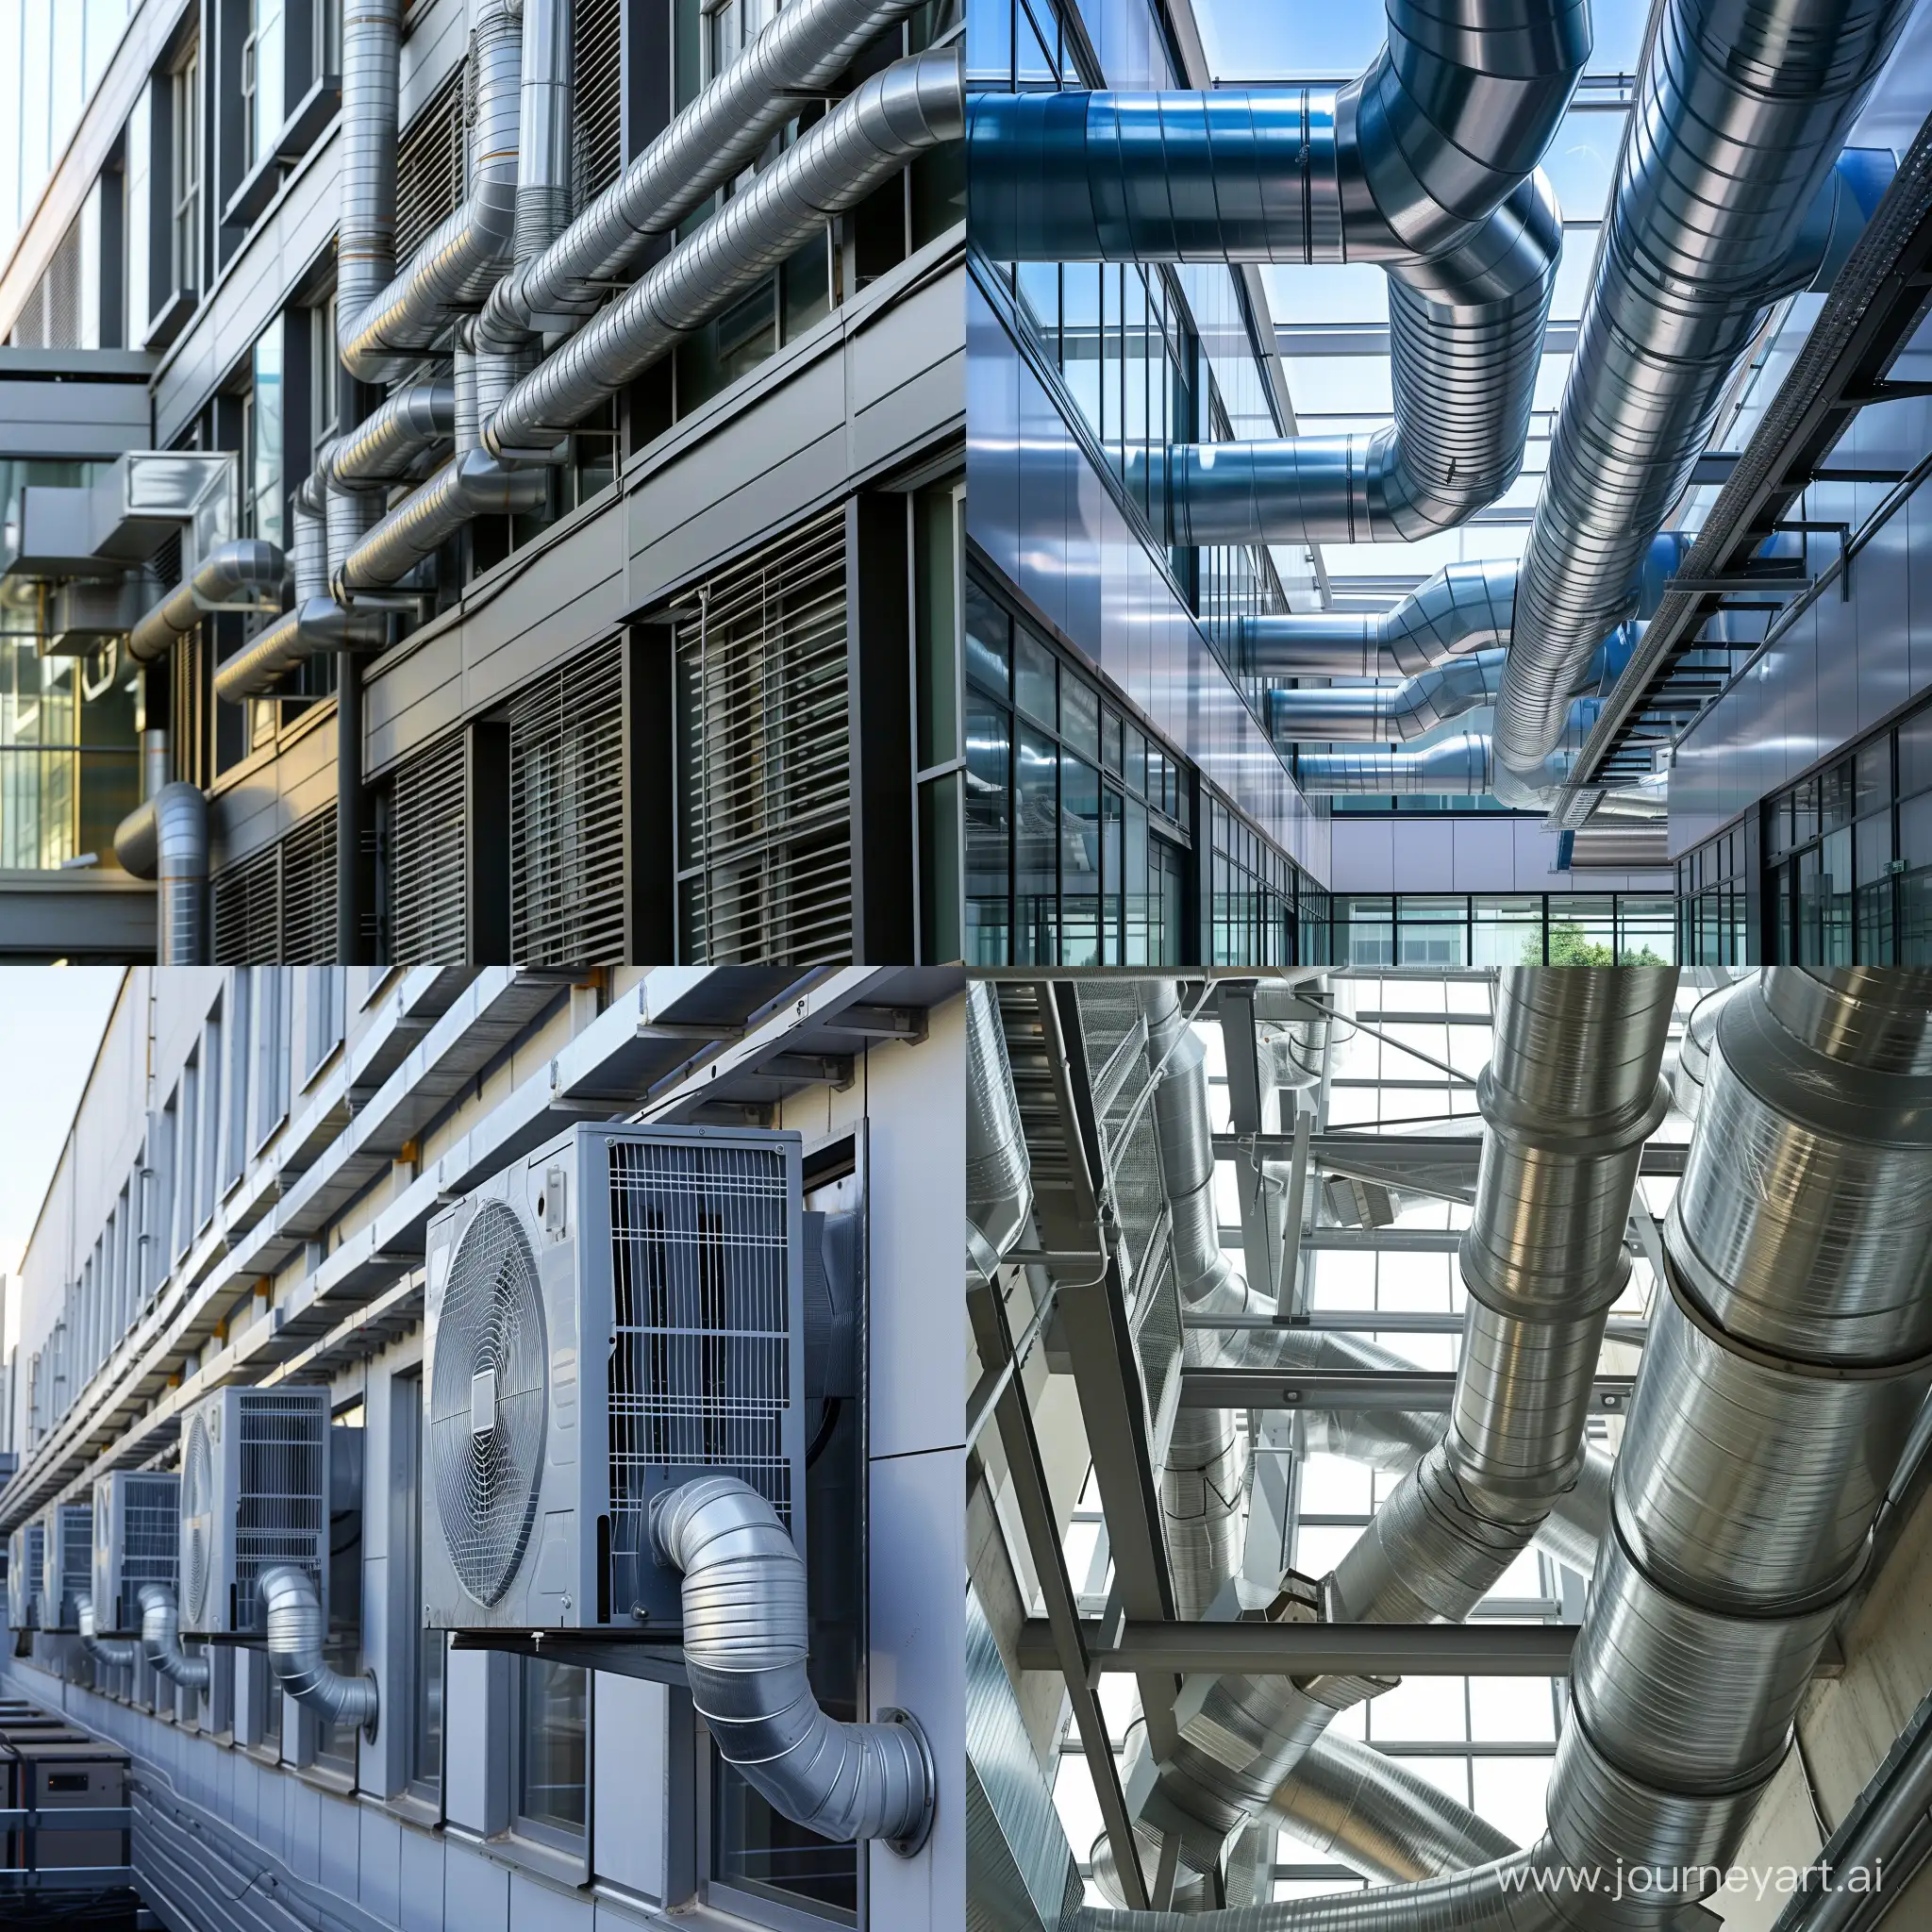 create a system of air ventilation in a building